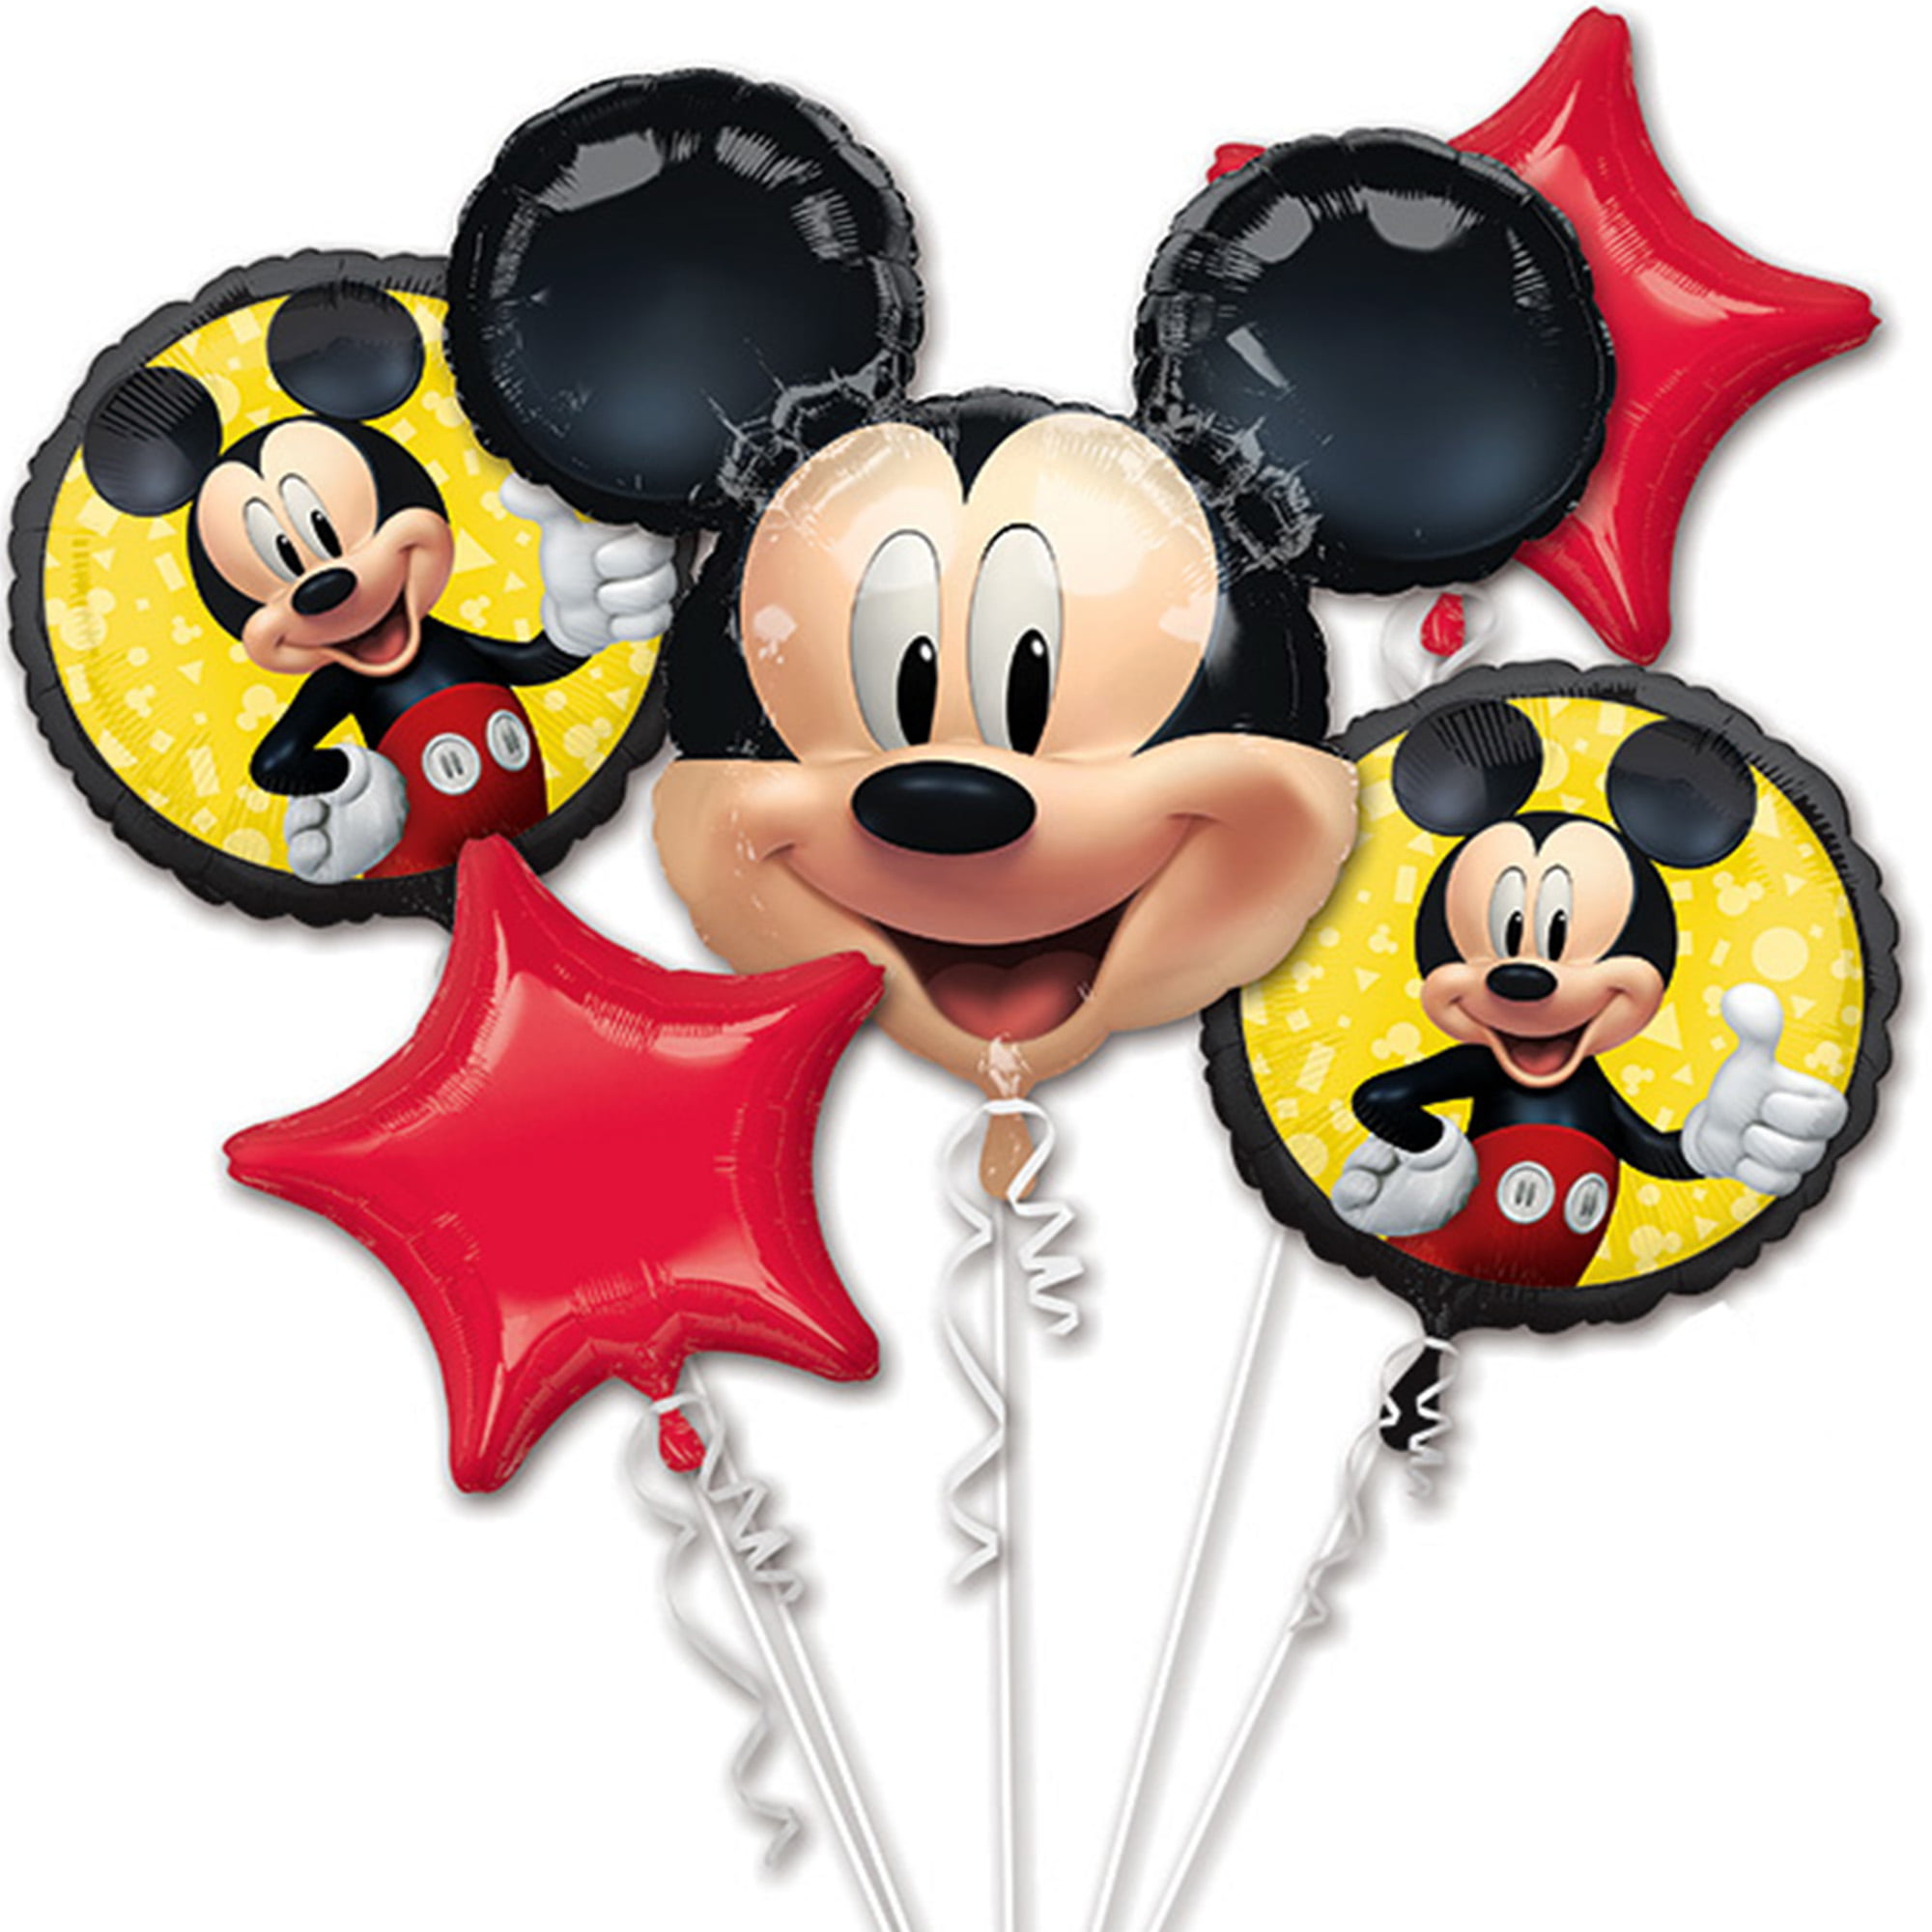  Anagram California Dreaming Birthday Party Supplies Balloon Bouquet  Decorations, BQ_4119 : Toys & Games